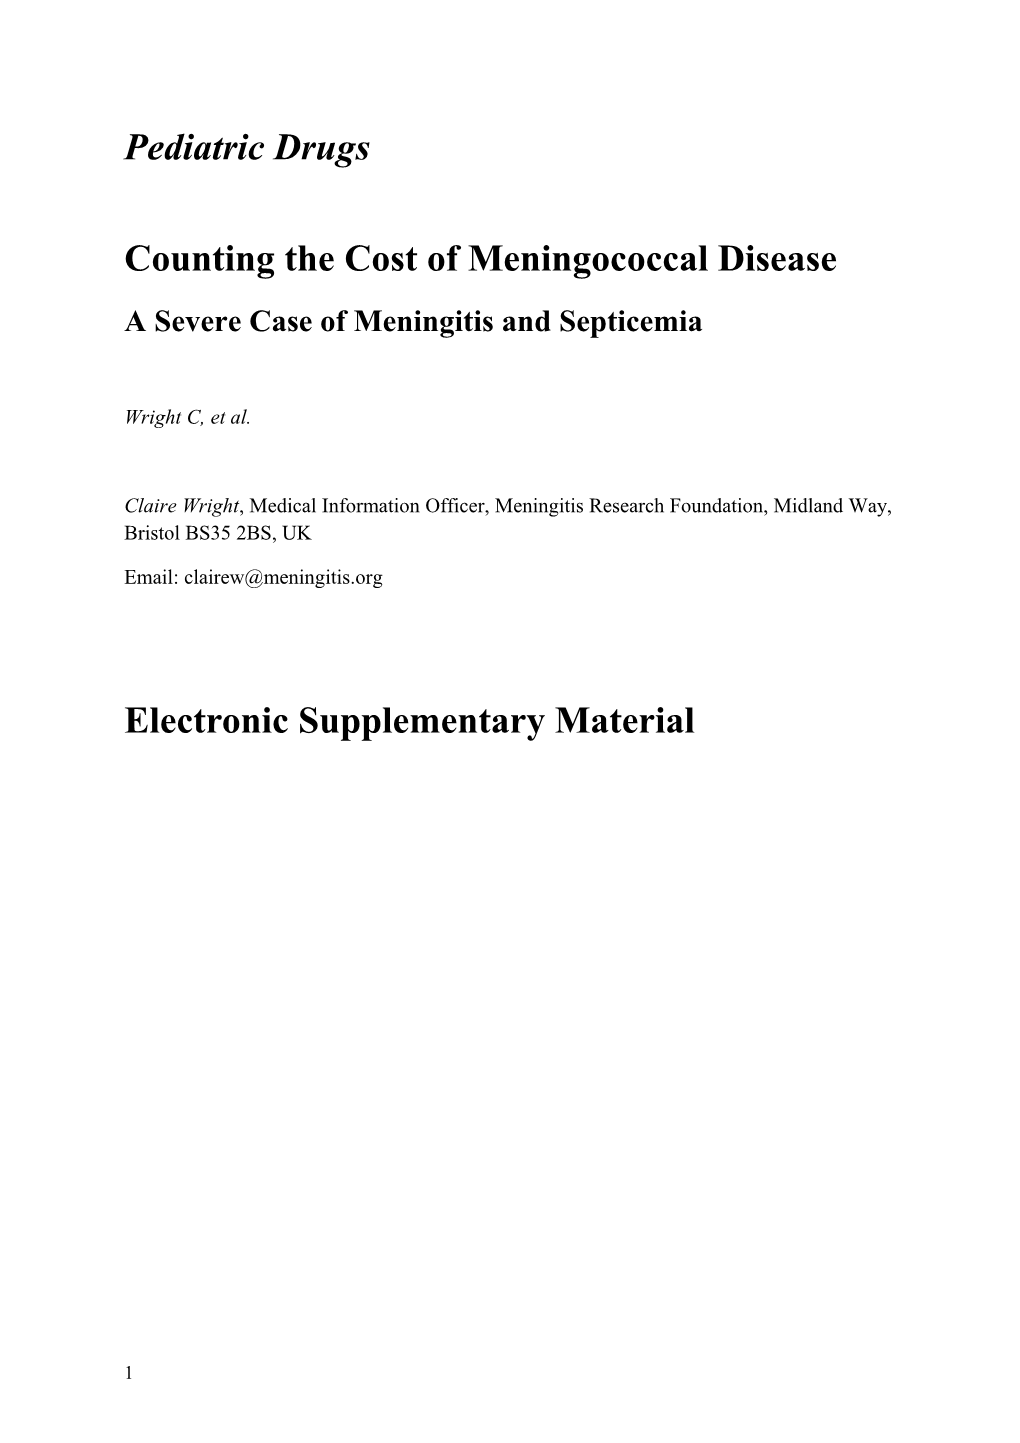 Counting the Cost of Meningococcal Disease